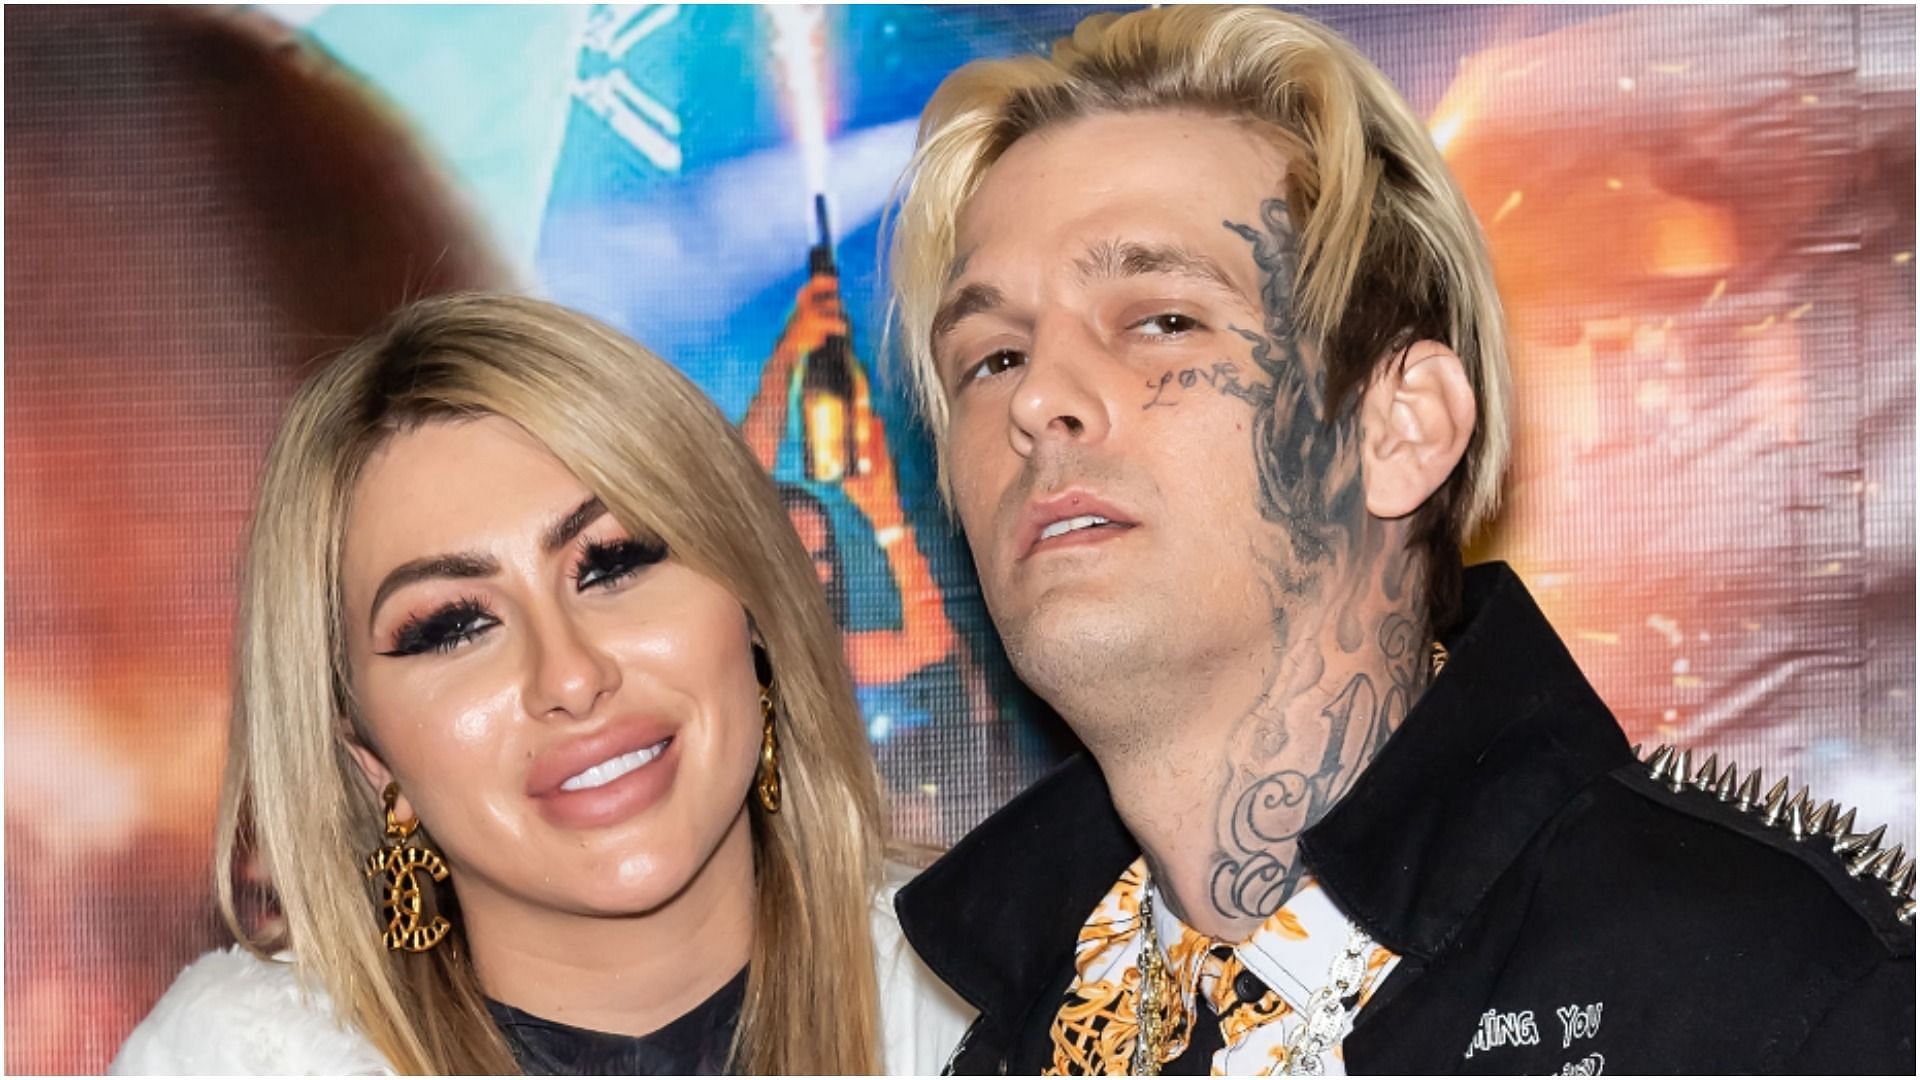 Aaron Carter and his fianc&eacute;e Melanie Martin attend the Celebrity Boxing Face-Off between Lamar Odom &amp; Aaron Carter on April 10, 2021, in Philadelphia, Pennsylvania (Image by Gilbert Carrasquillo/WireImage via Getty Images)